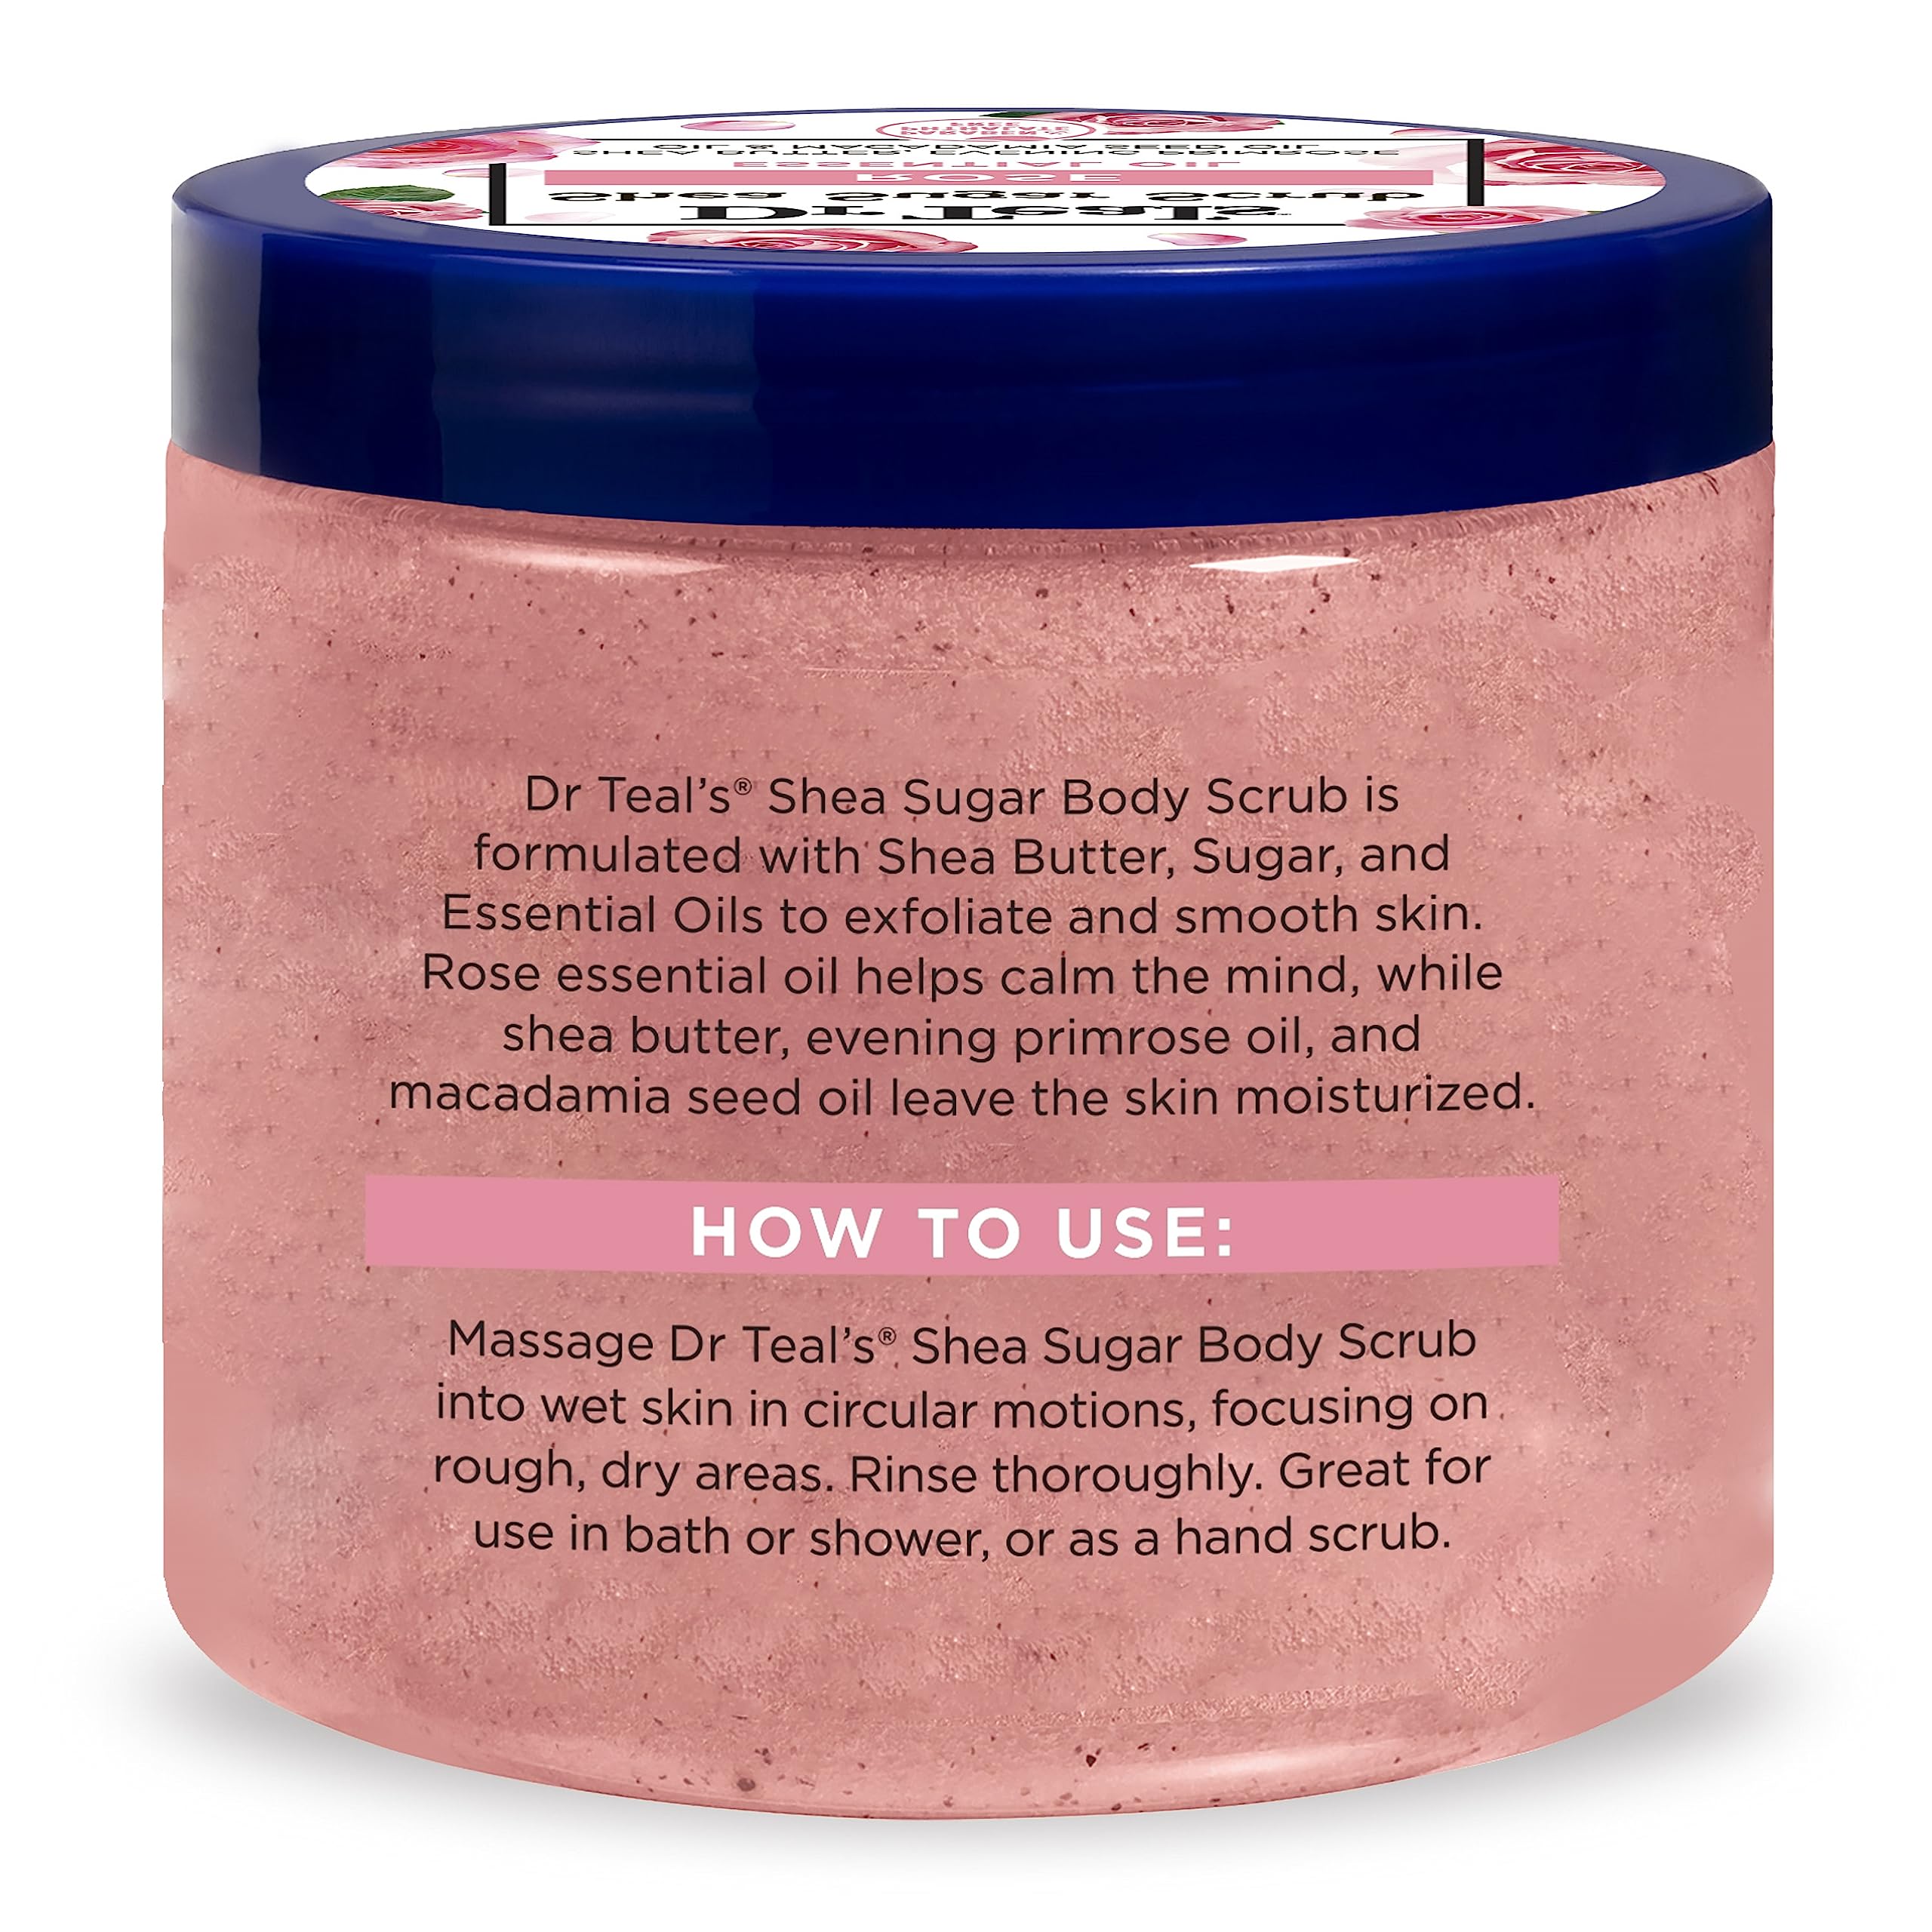 Dr Teal's Shea Sugar Scrub Trial Pack, Rose, Shea Butter, Citrus 19 oz (Pack of 3) (Packaging May Vary)